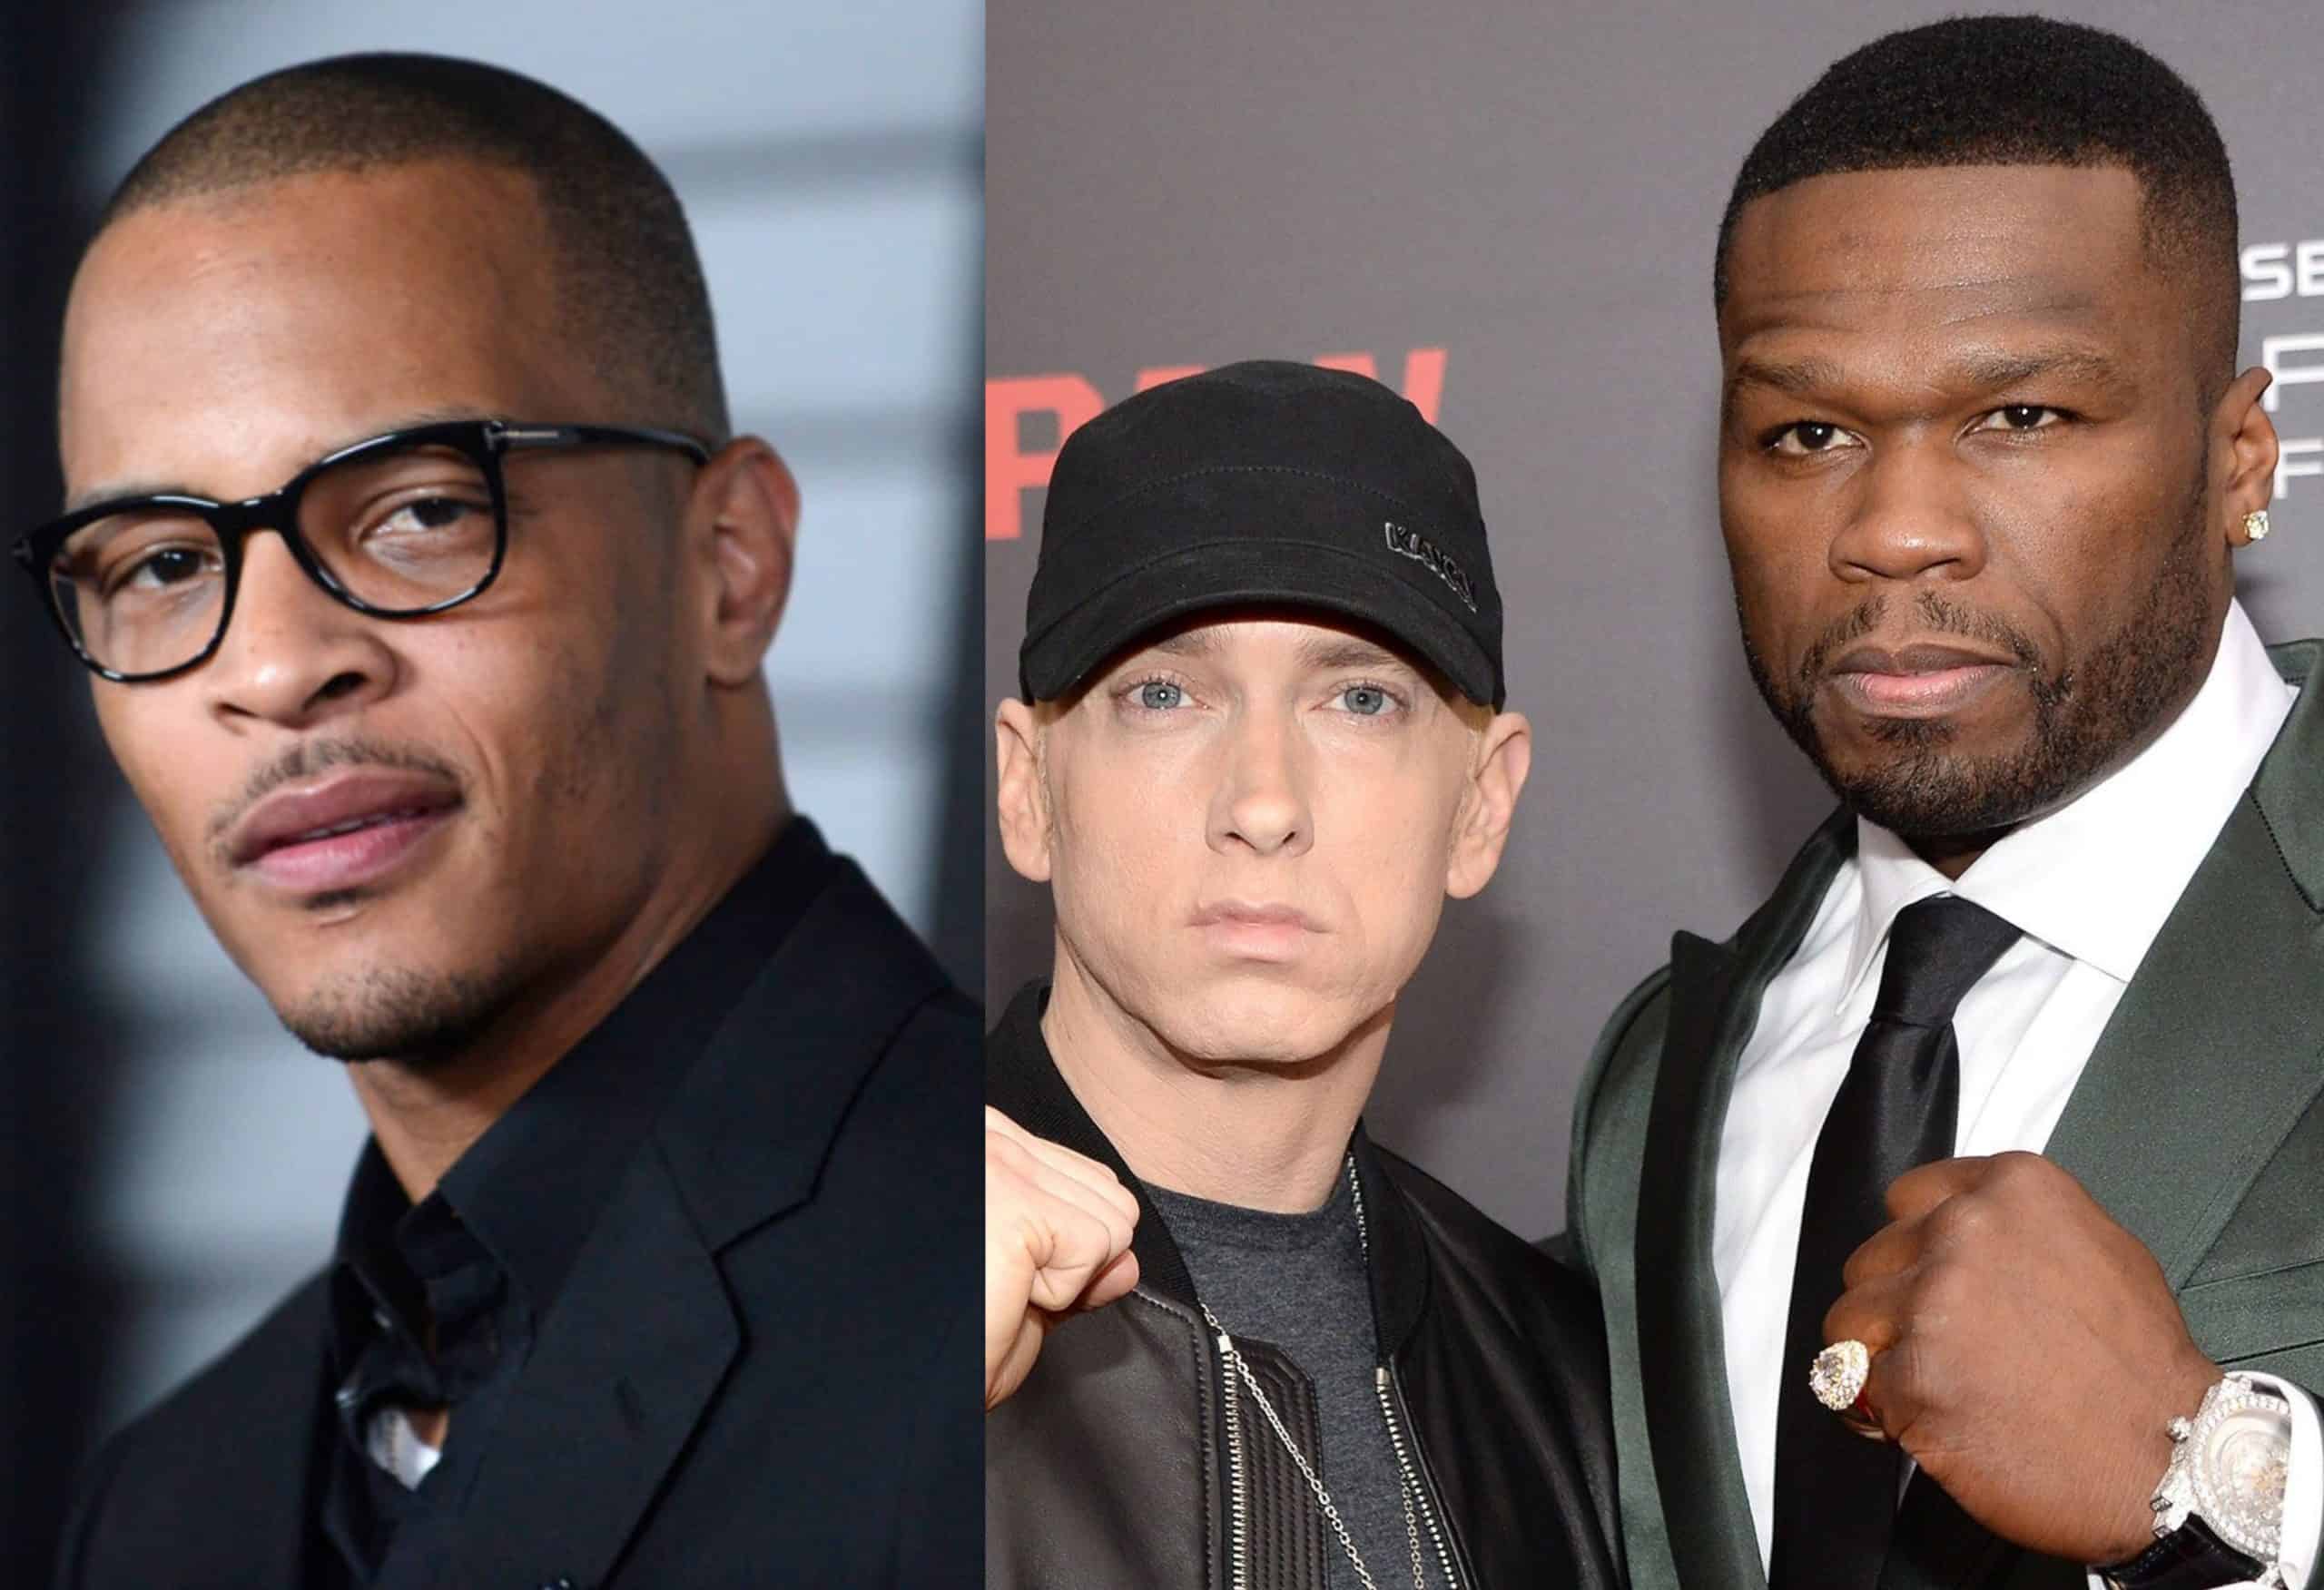 T.I. Says He Would Love To Verzuz Battle Eminem Since 50 Won't